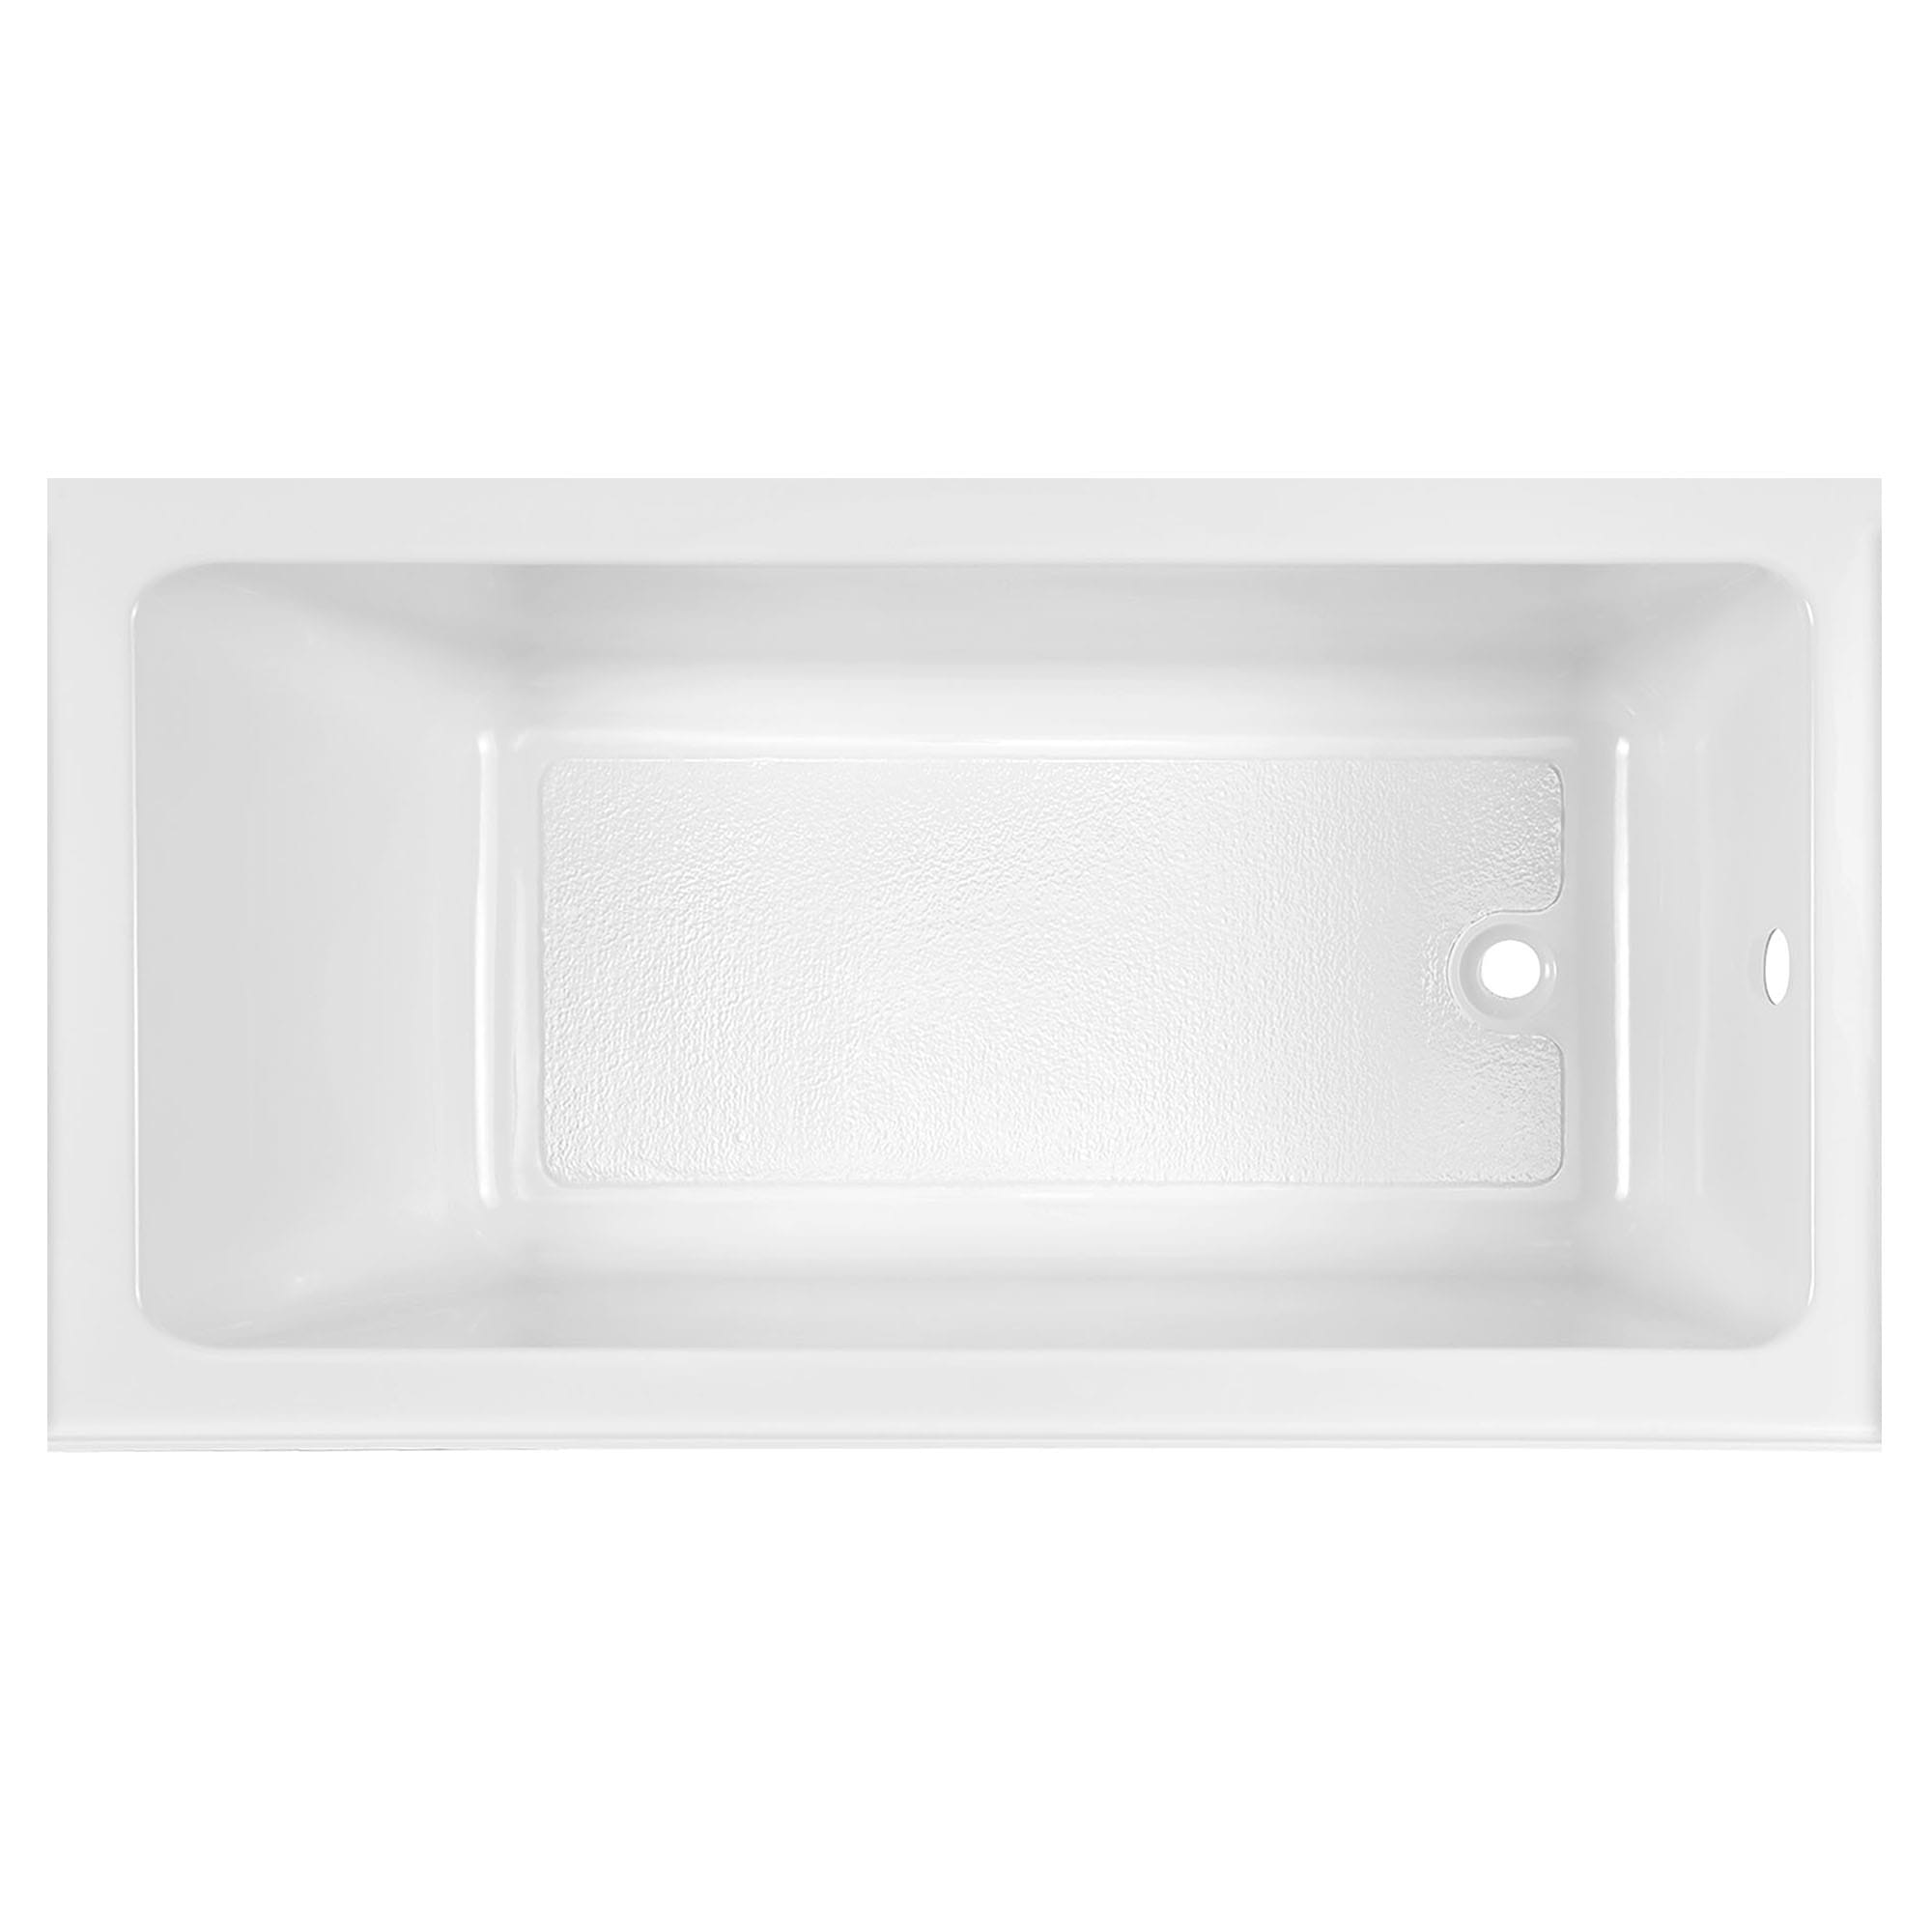 Studio 60 x 32 Inch Integral Apron Bathtub Above Floor Rough With Right Hand Outlet ARCTIC